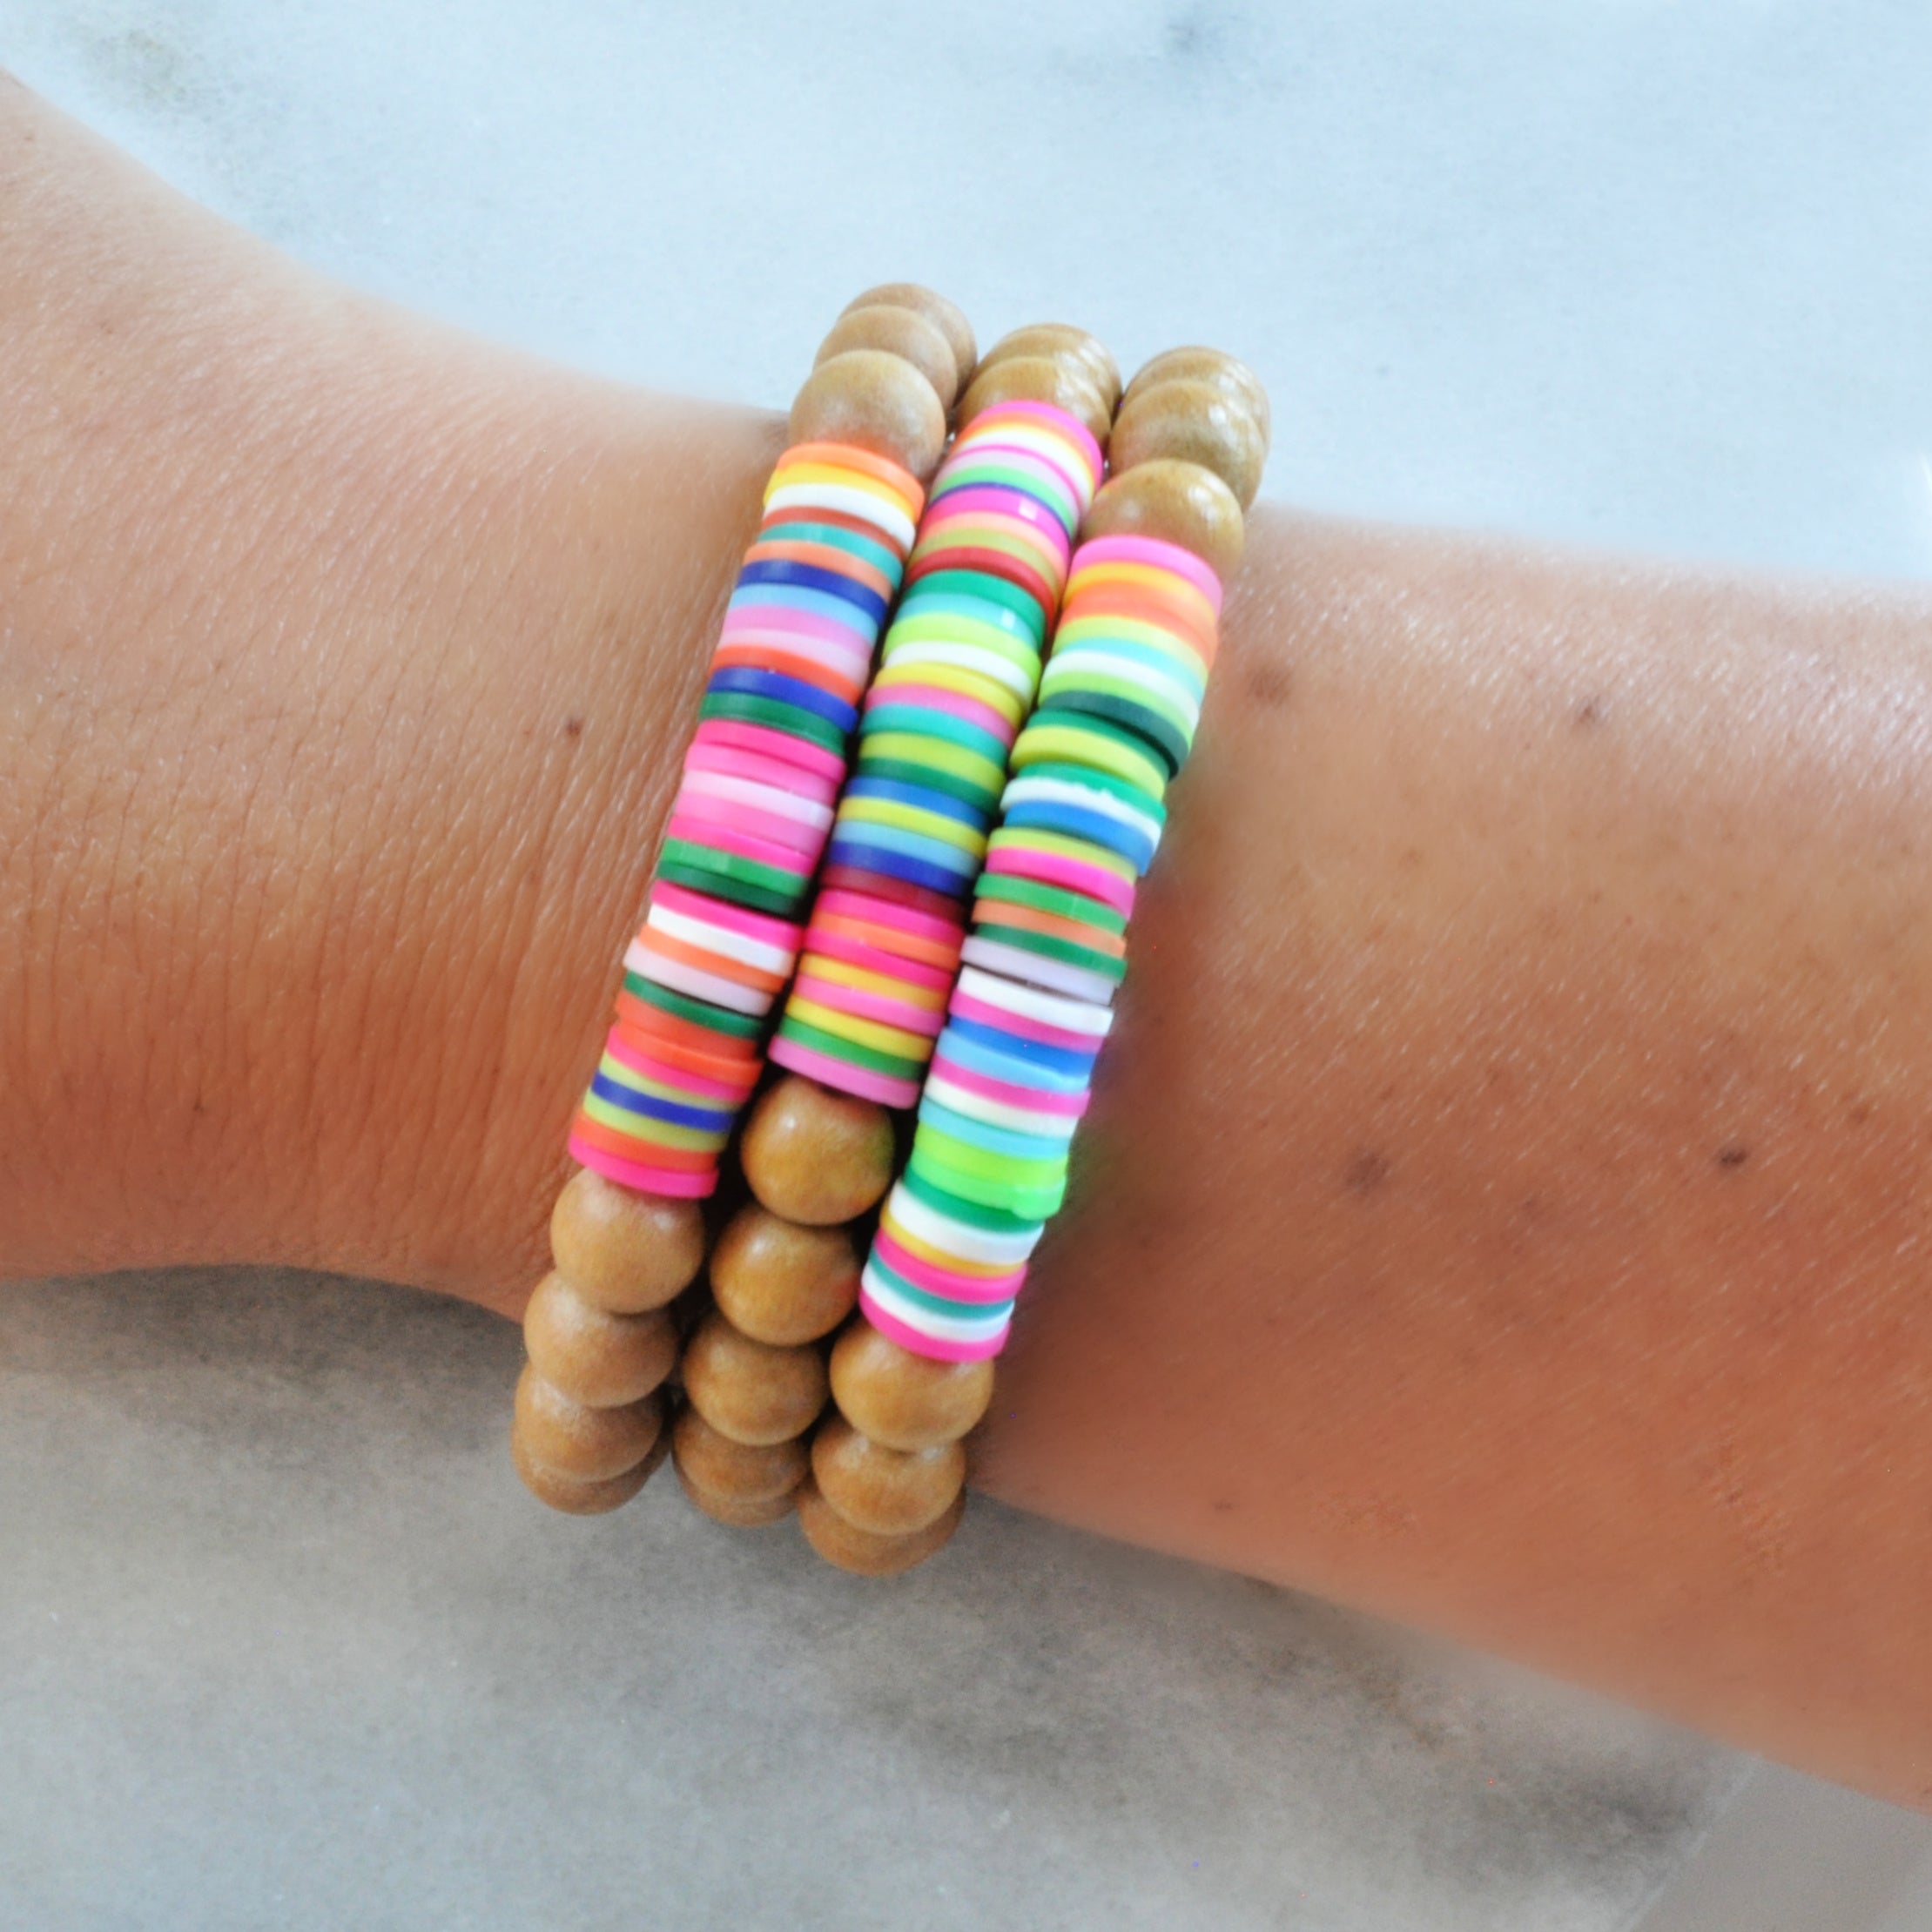 Wood and Heishi bead Bracelets from Libby & Smee shown on wrist